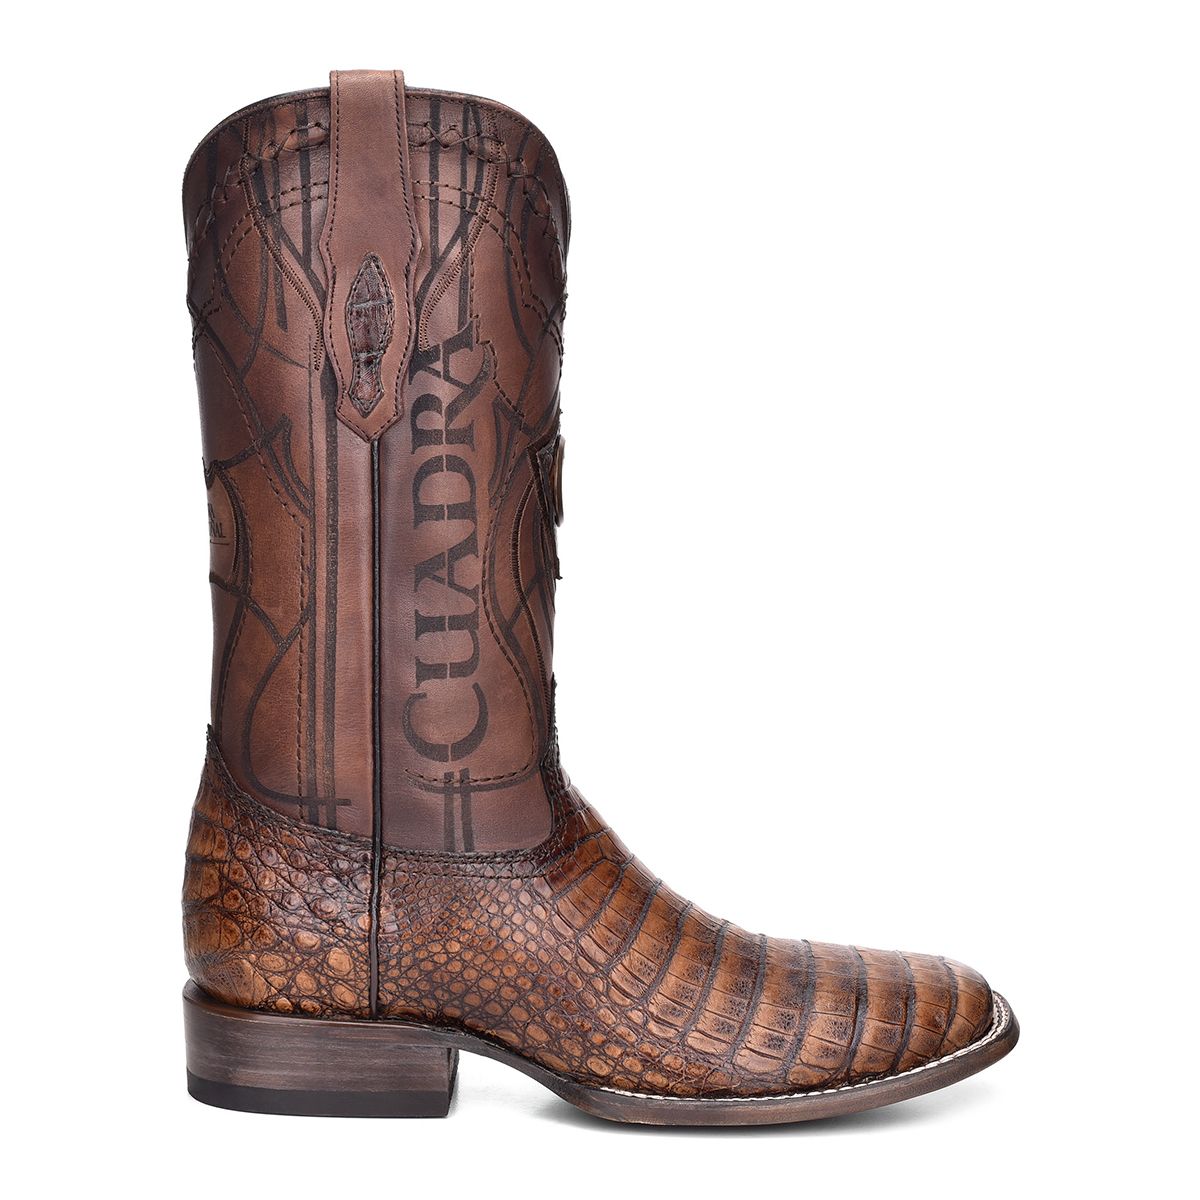 3Z1OFY - Cuadra maple cowboy rodeo caiman belly leather boots for men-Kuet.us